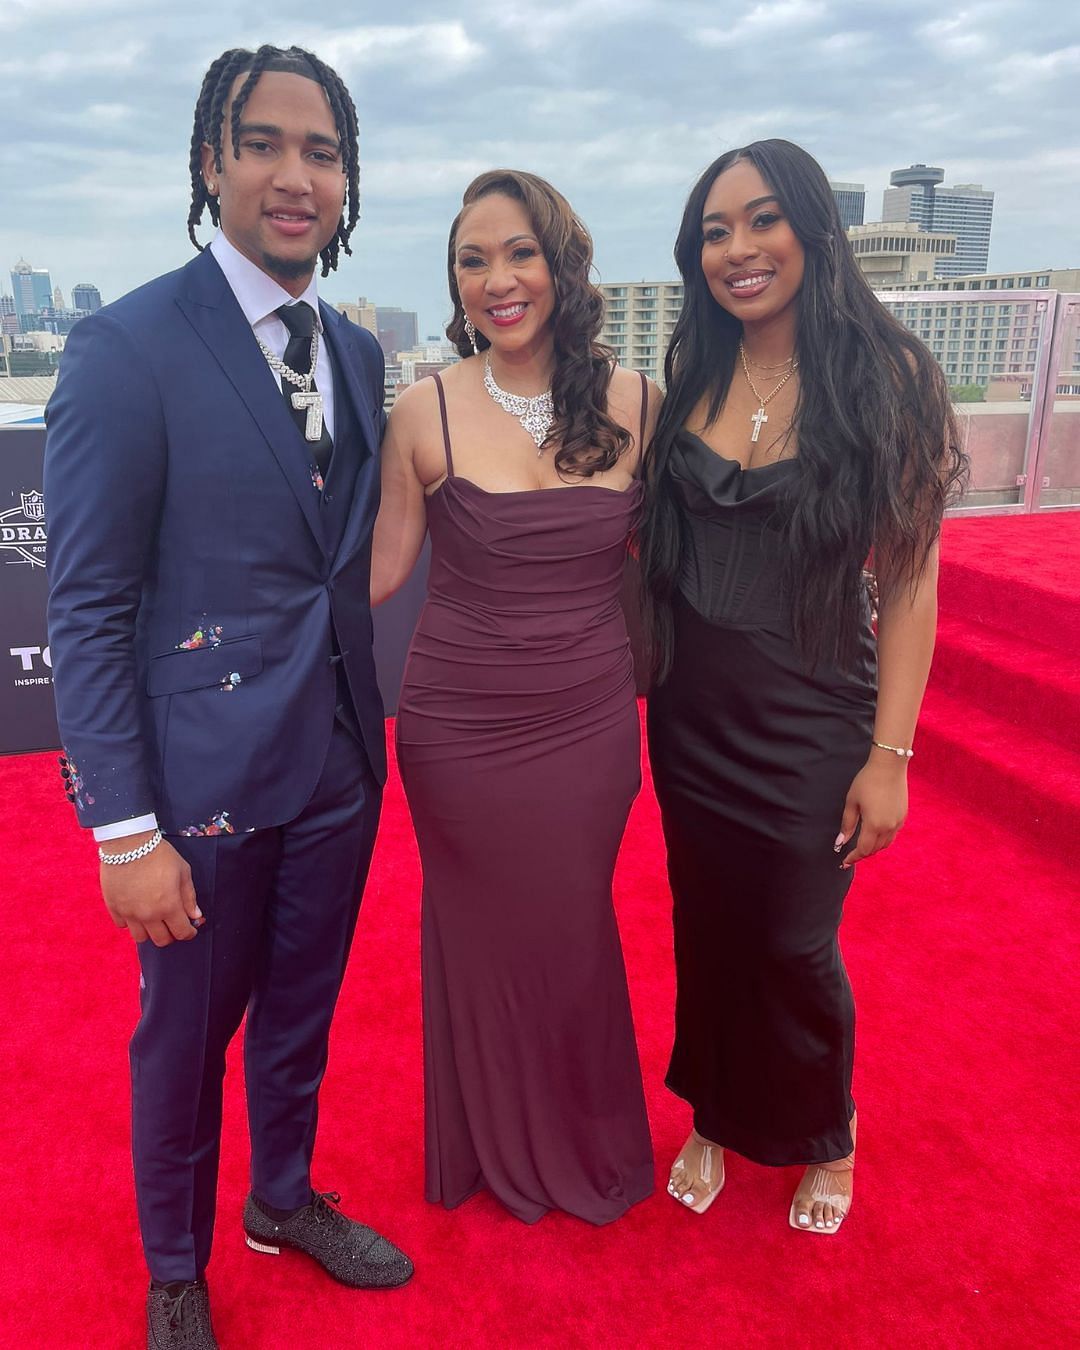 C.J. Stroud is on the red carpet with his mother Kimberly and one of his sisters. Credit: @DaShawnWSOC9 (Twitter)